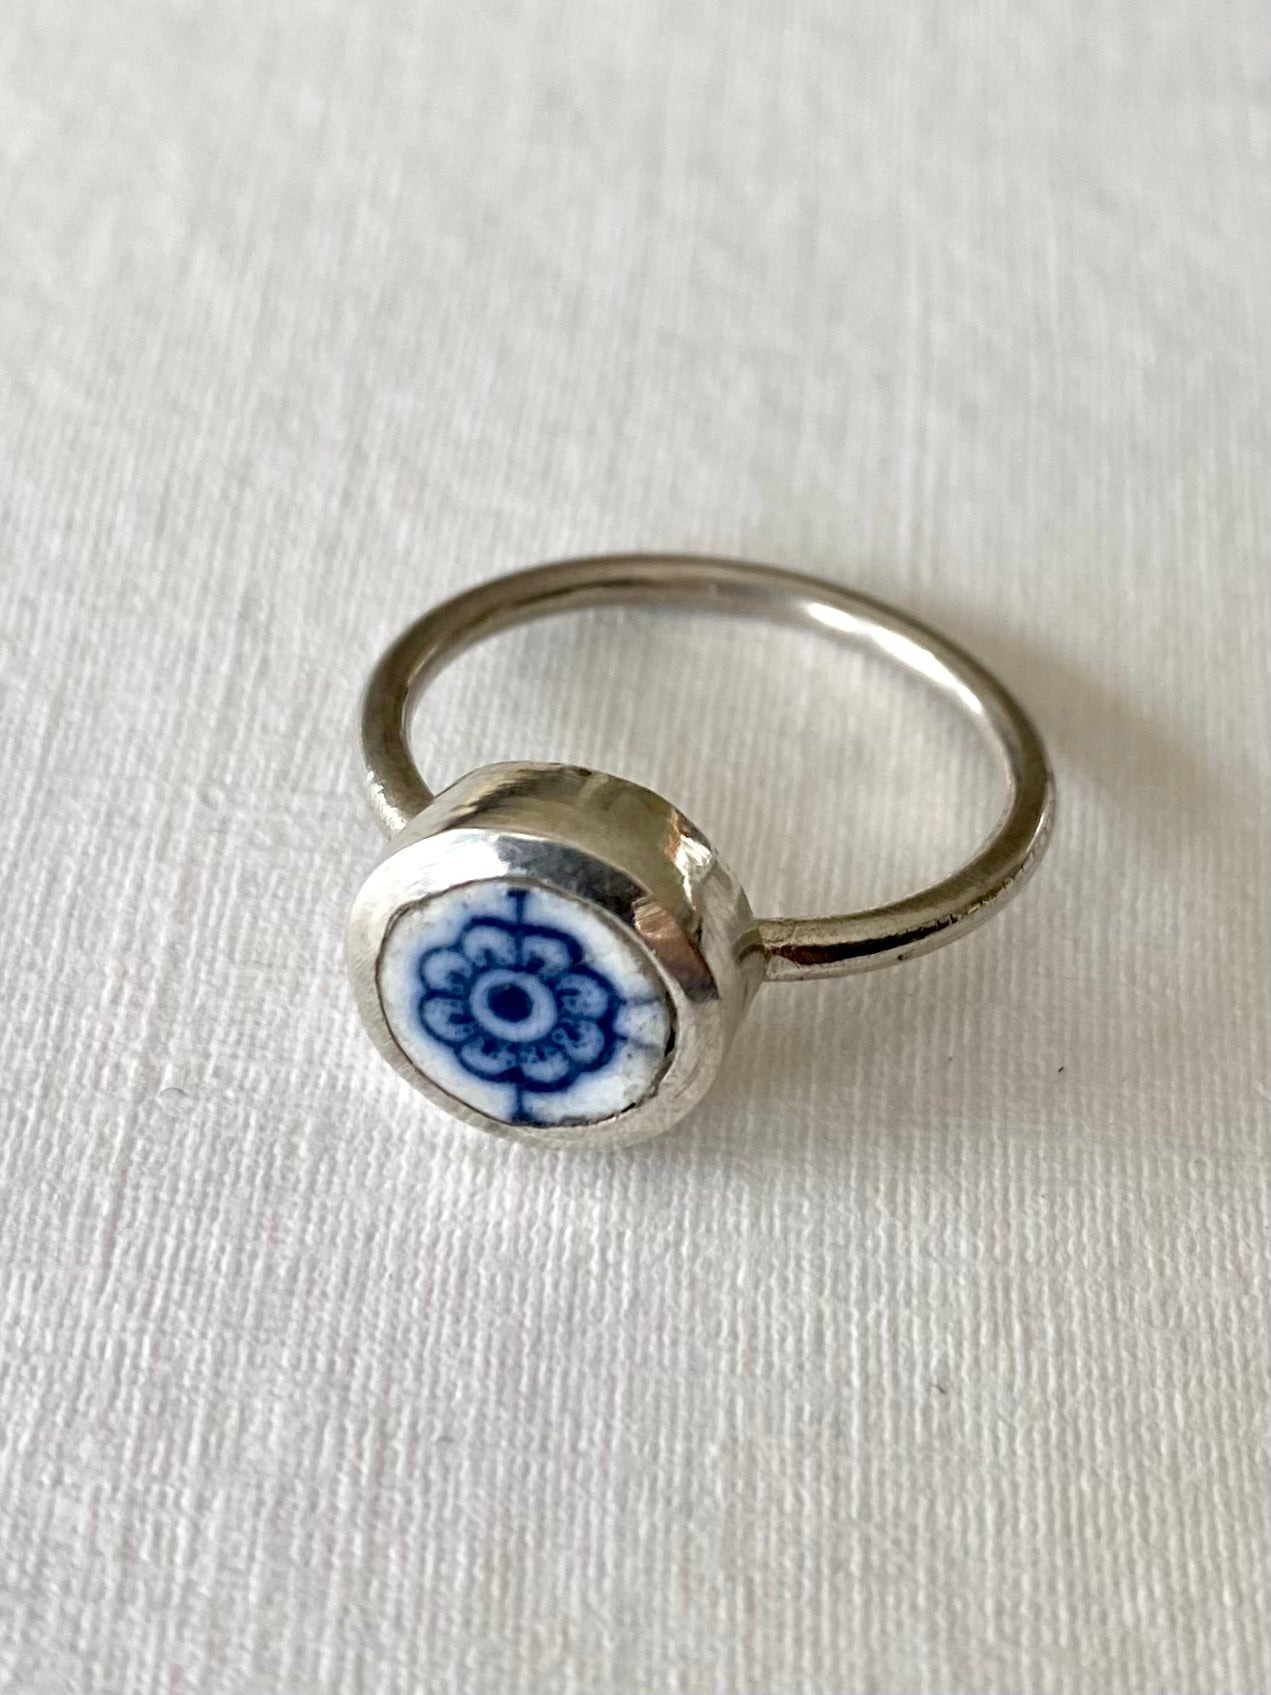 Small ceramic blue and white flower ring